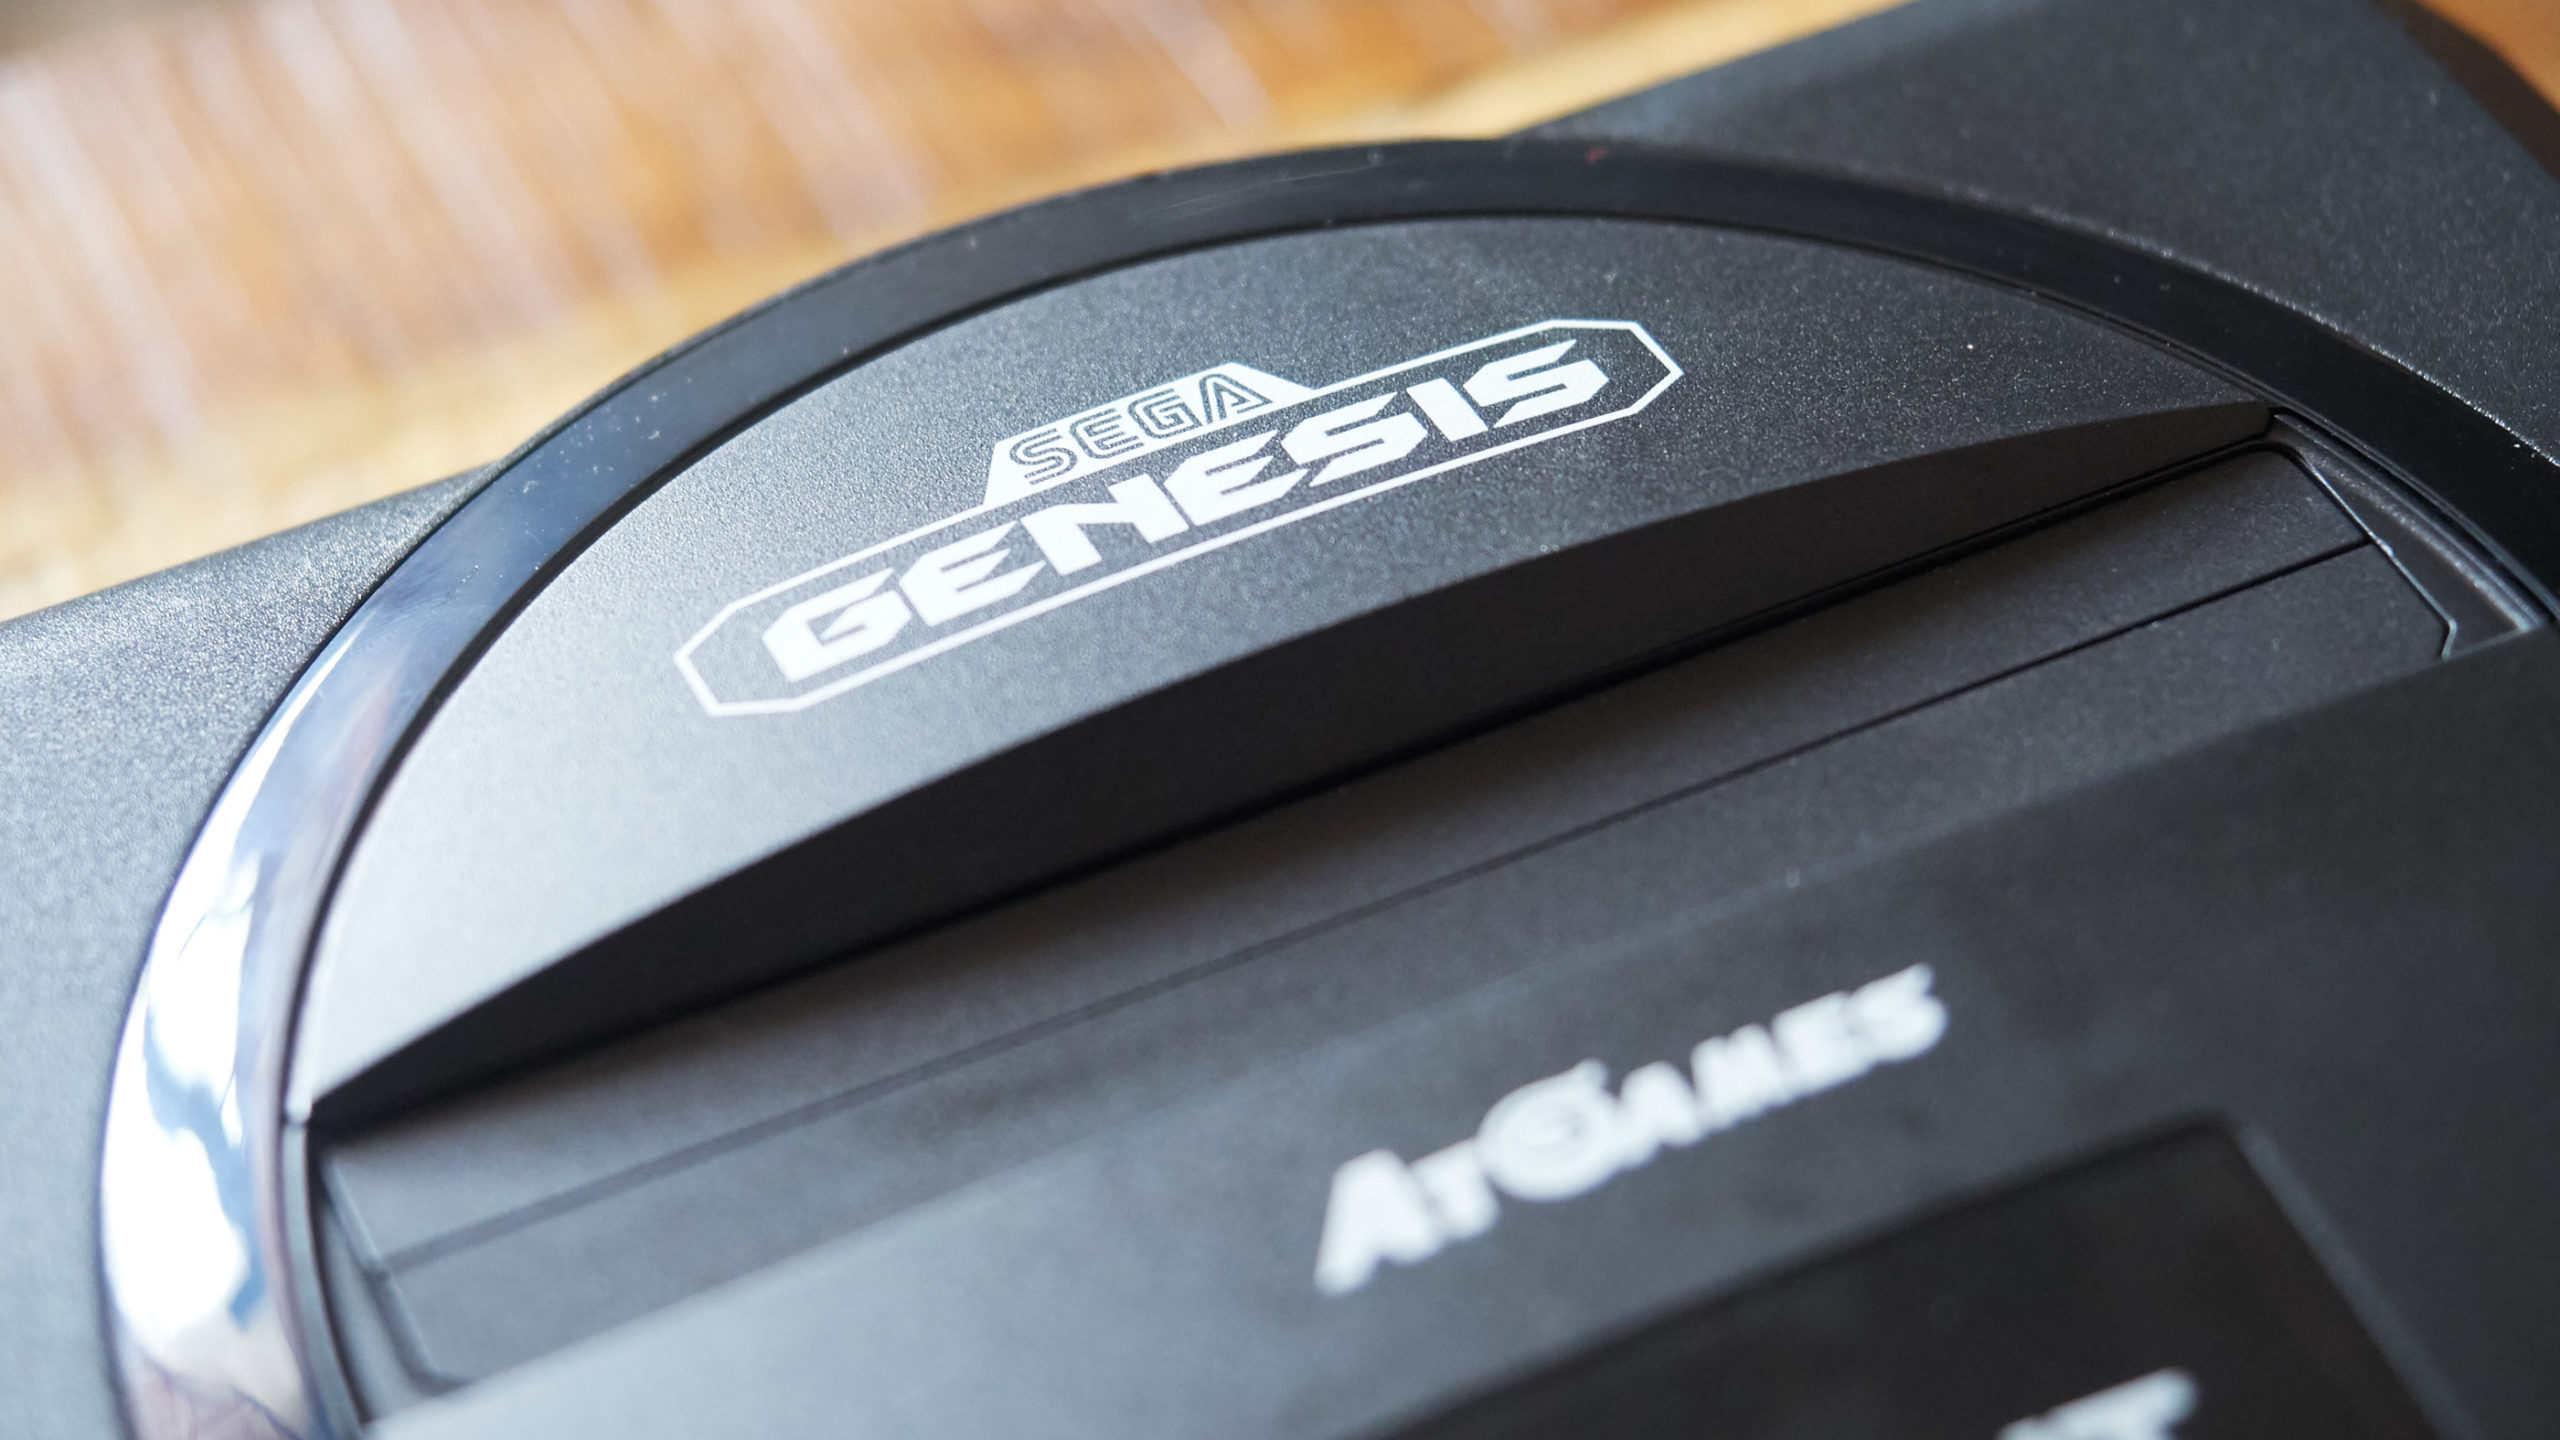 I Tested Two Retro Consoles – One Good, One Hot Garbage